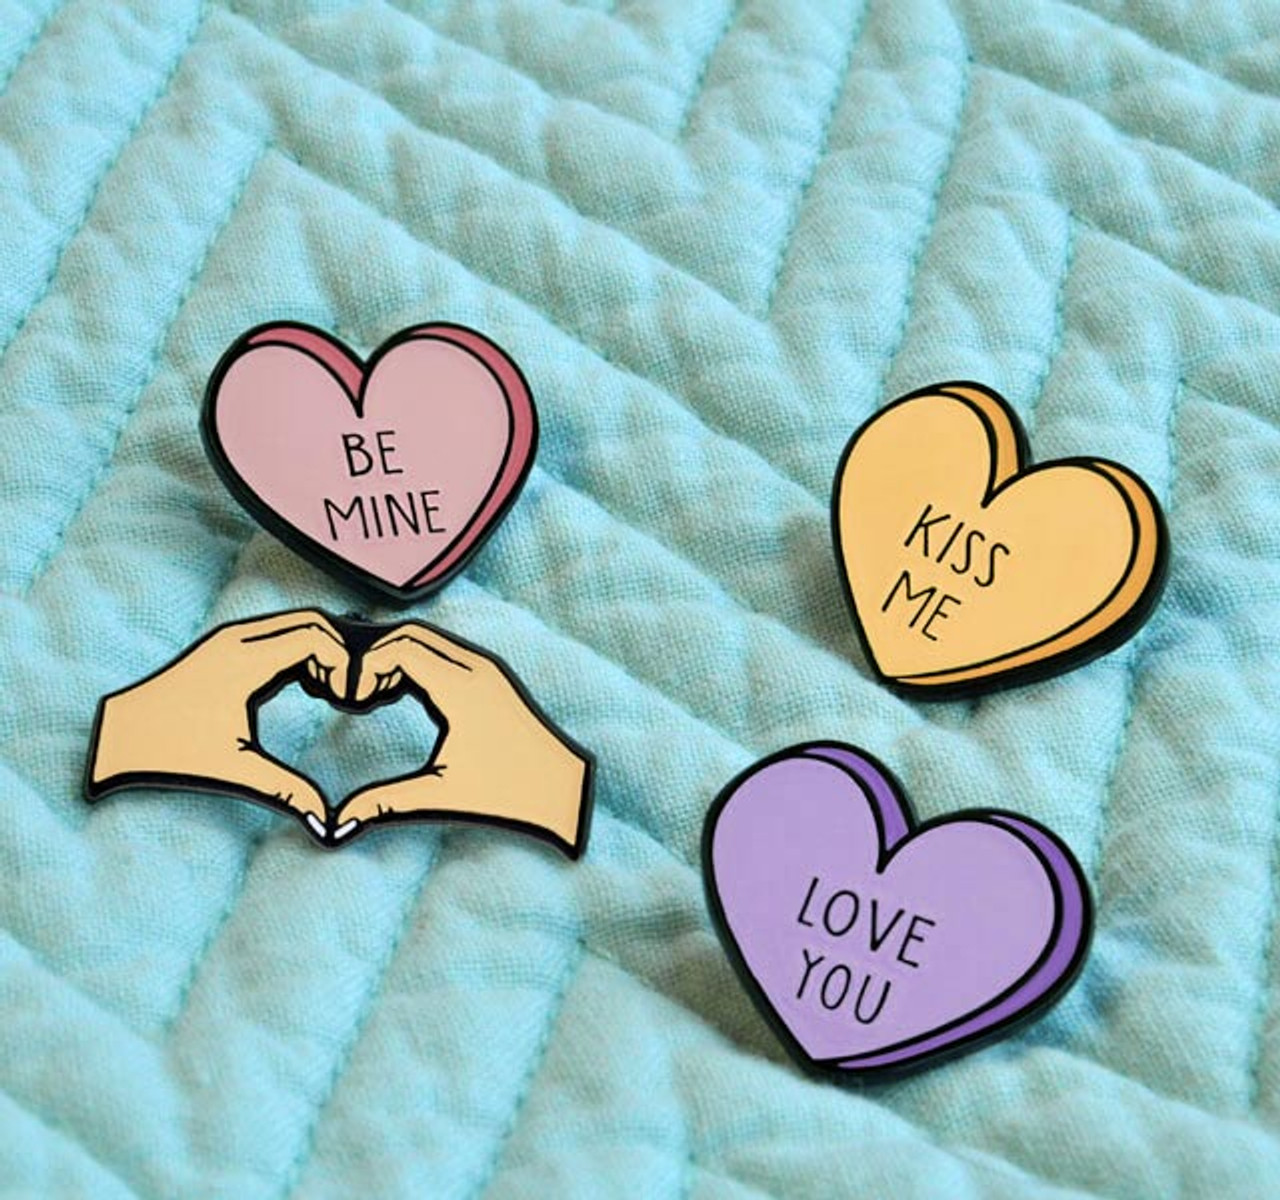 Love Your Heart Pin